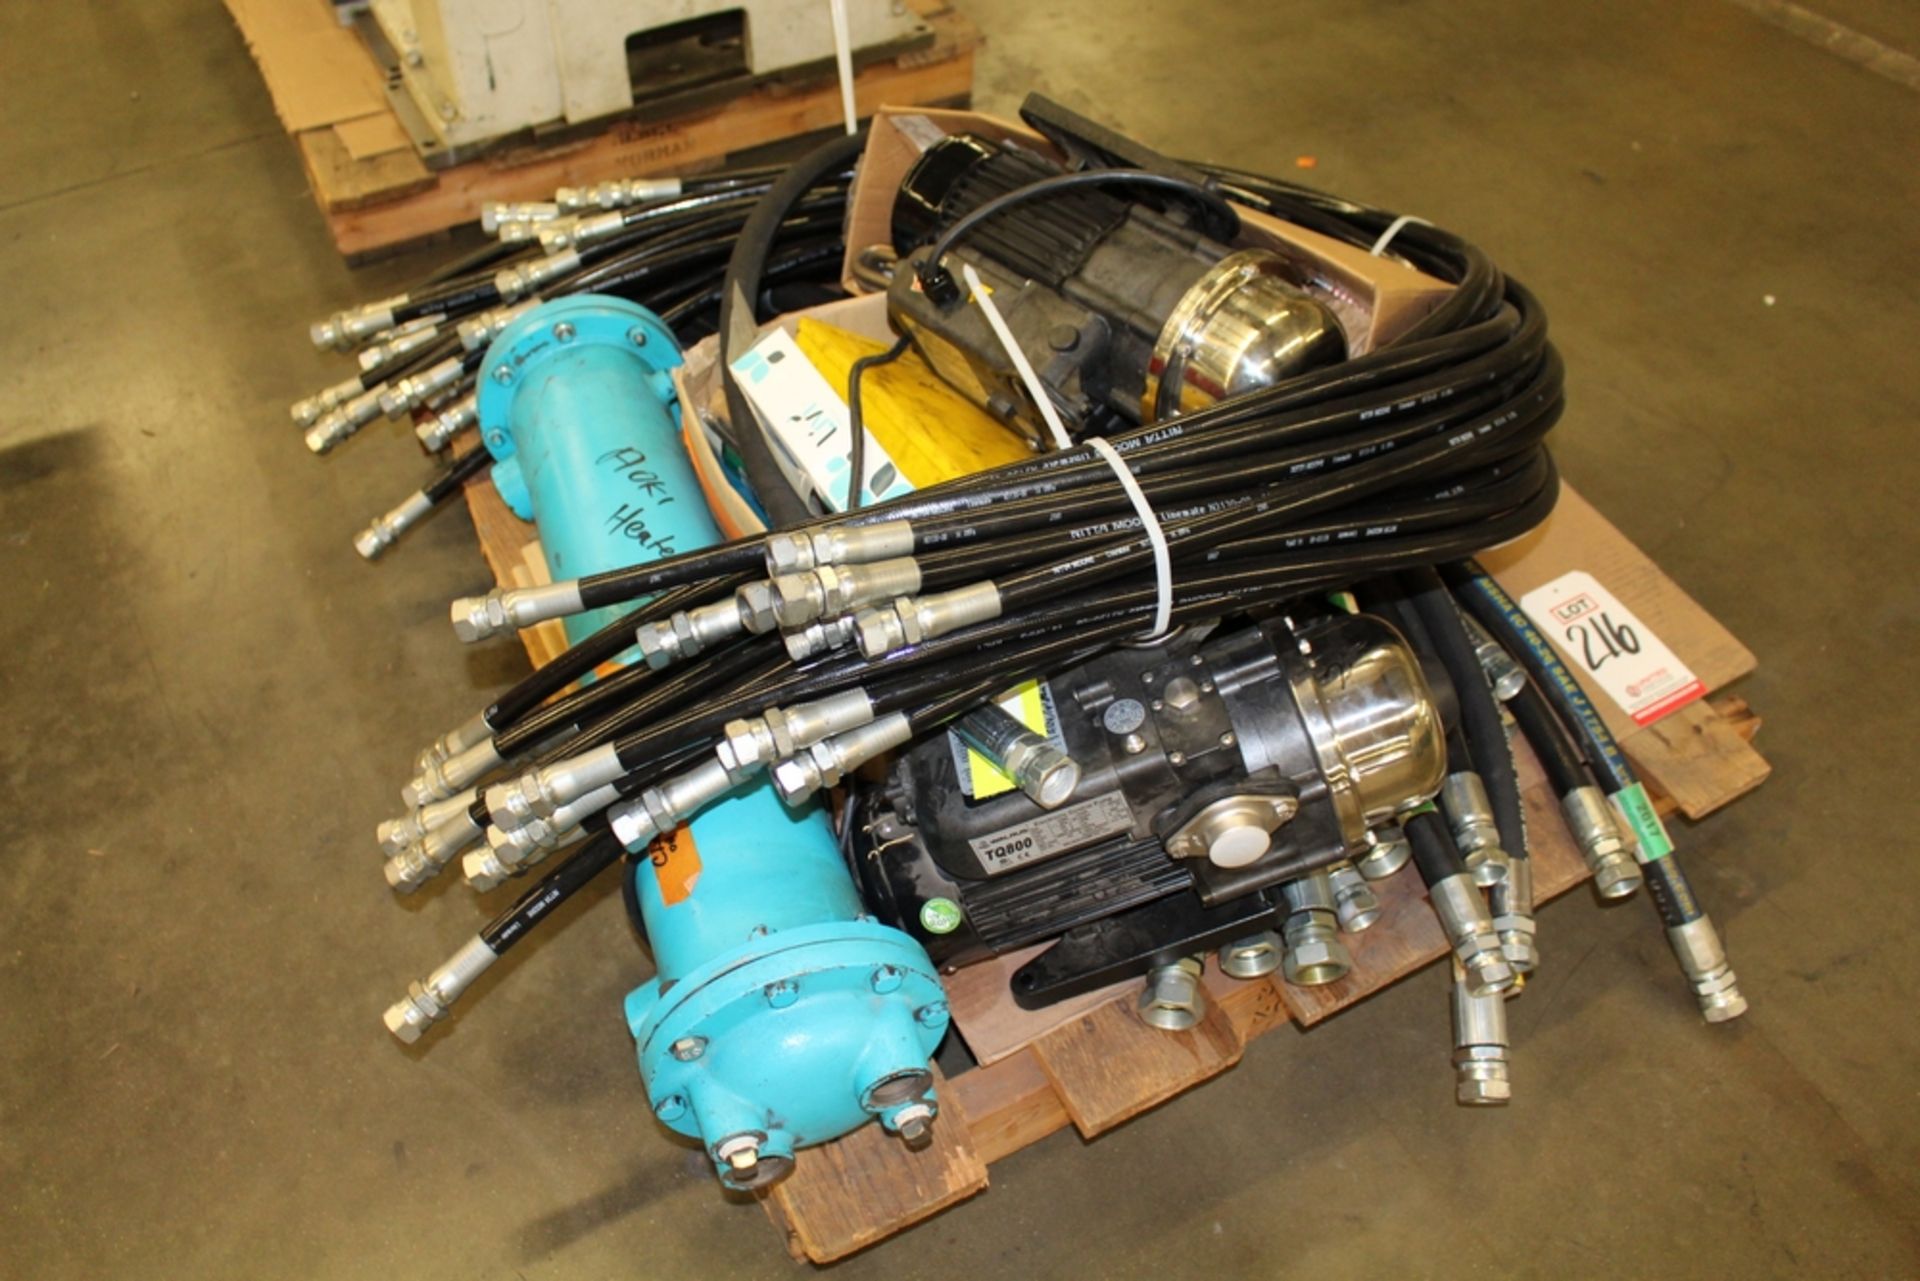 LOT (2) WALRUS ELECTRONIC CONTROL PUMPS, AOKI HEAT EXCHANGER, HYDRAULIC HOSES - Image 2 of 2